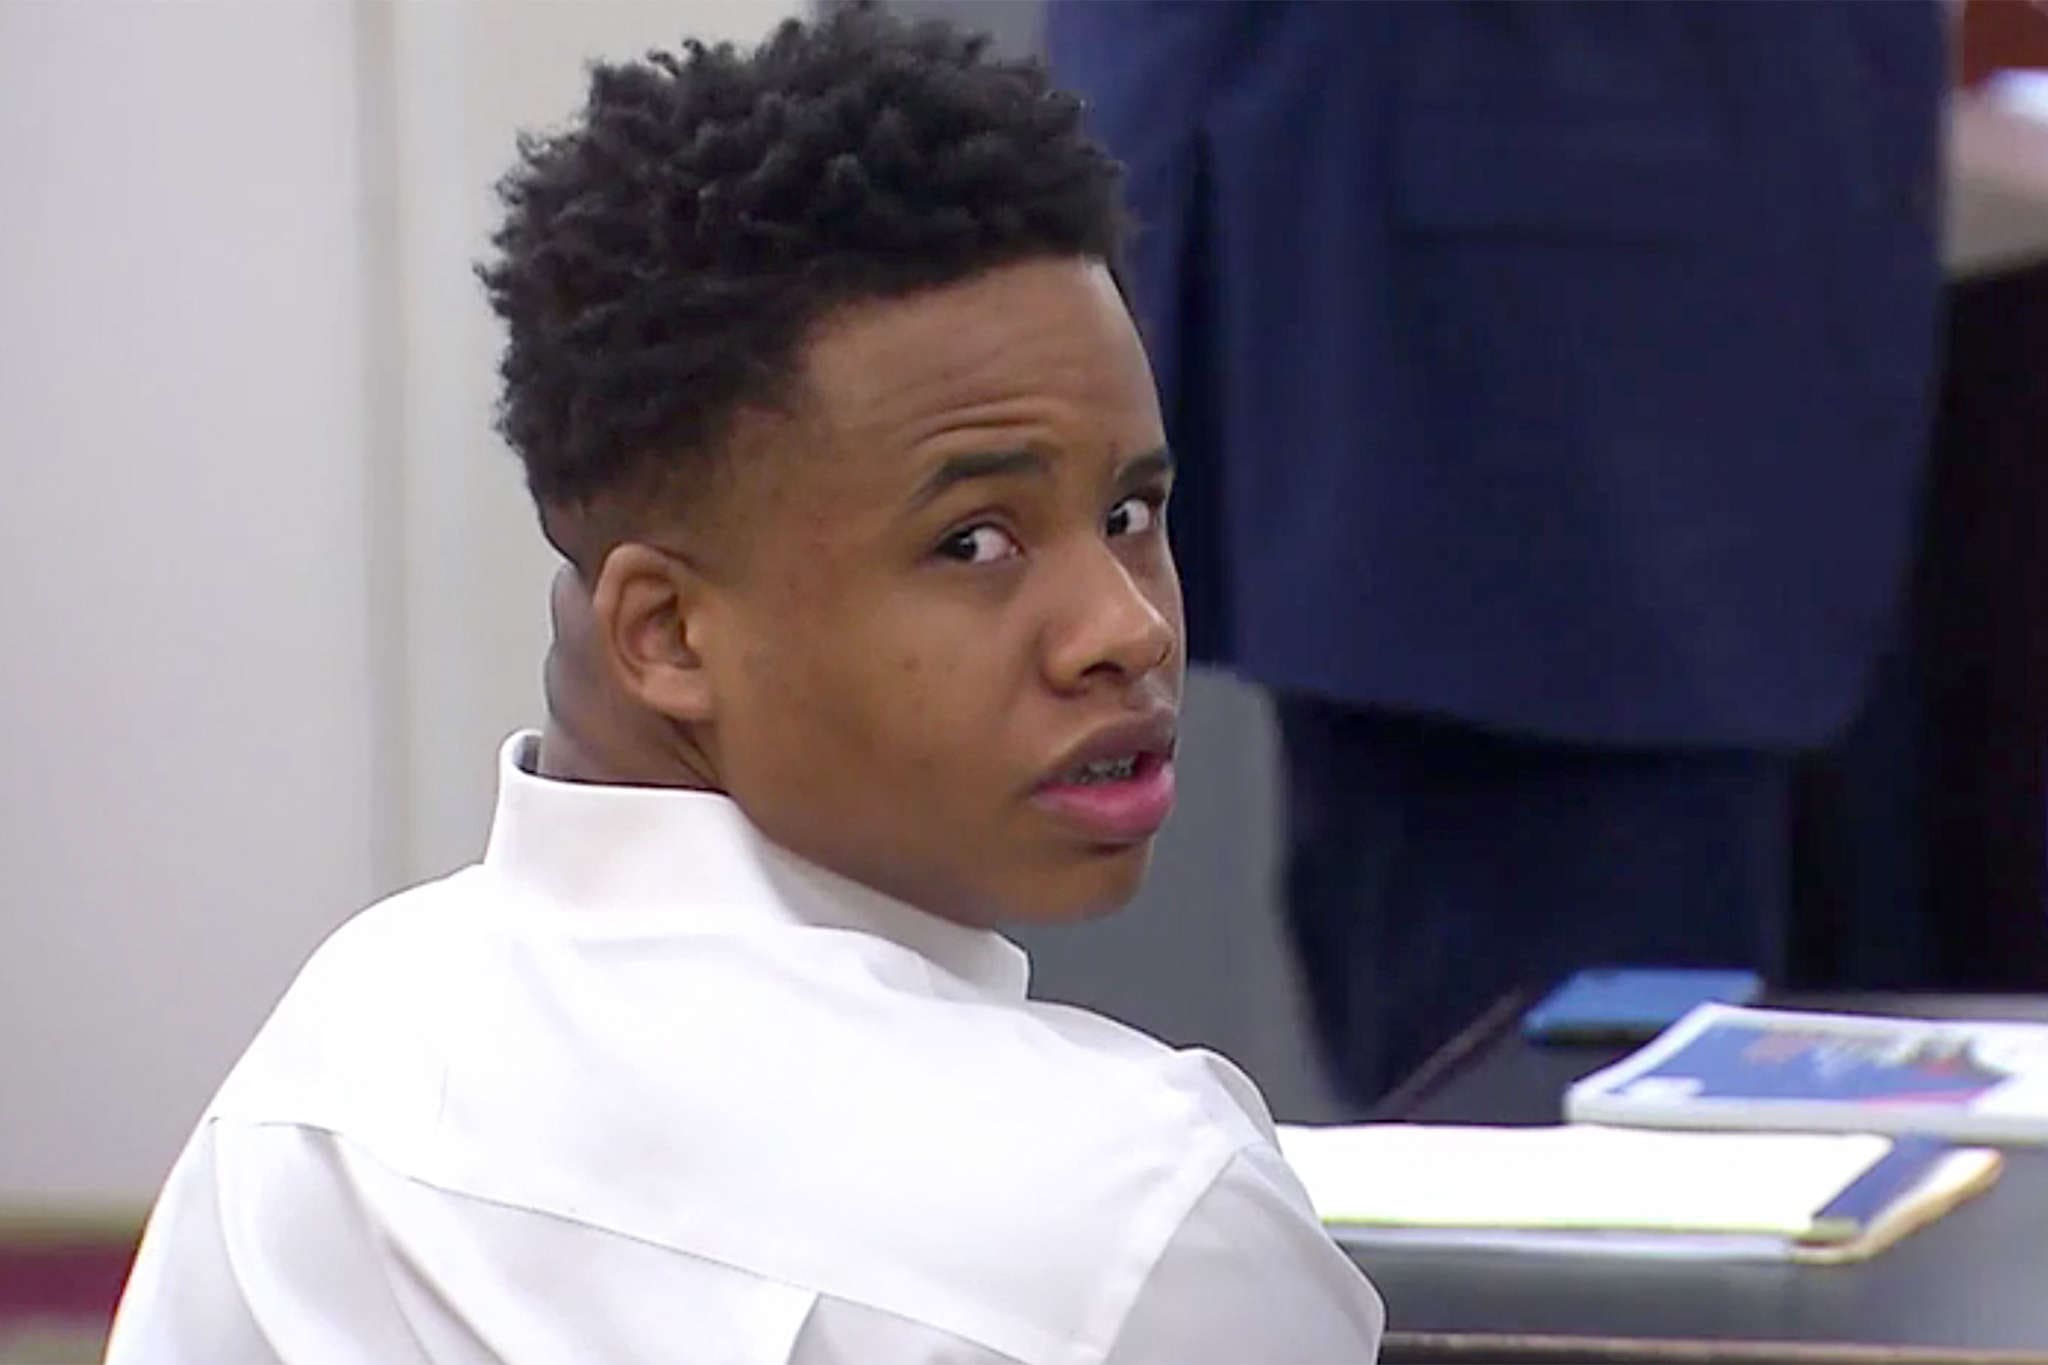 Tay-K To Receive About 40 Years In Prison, Lawyers Say | Celebrity Insider